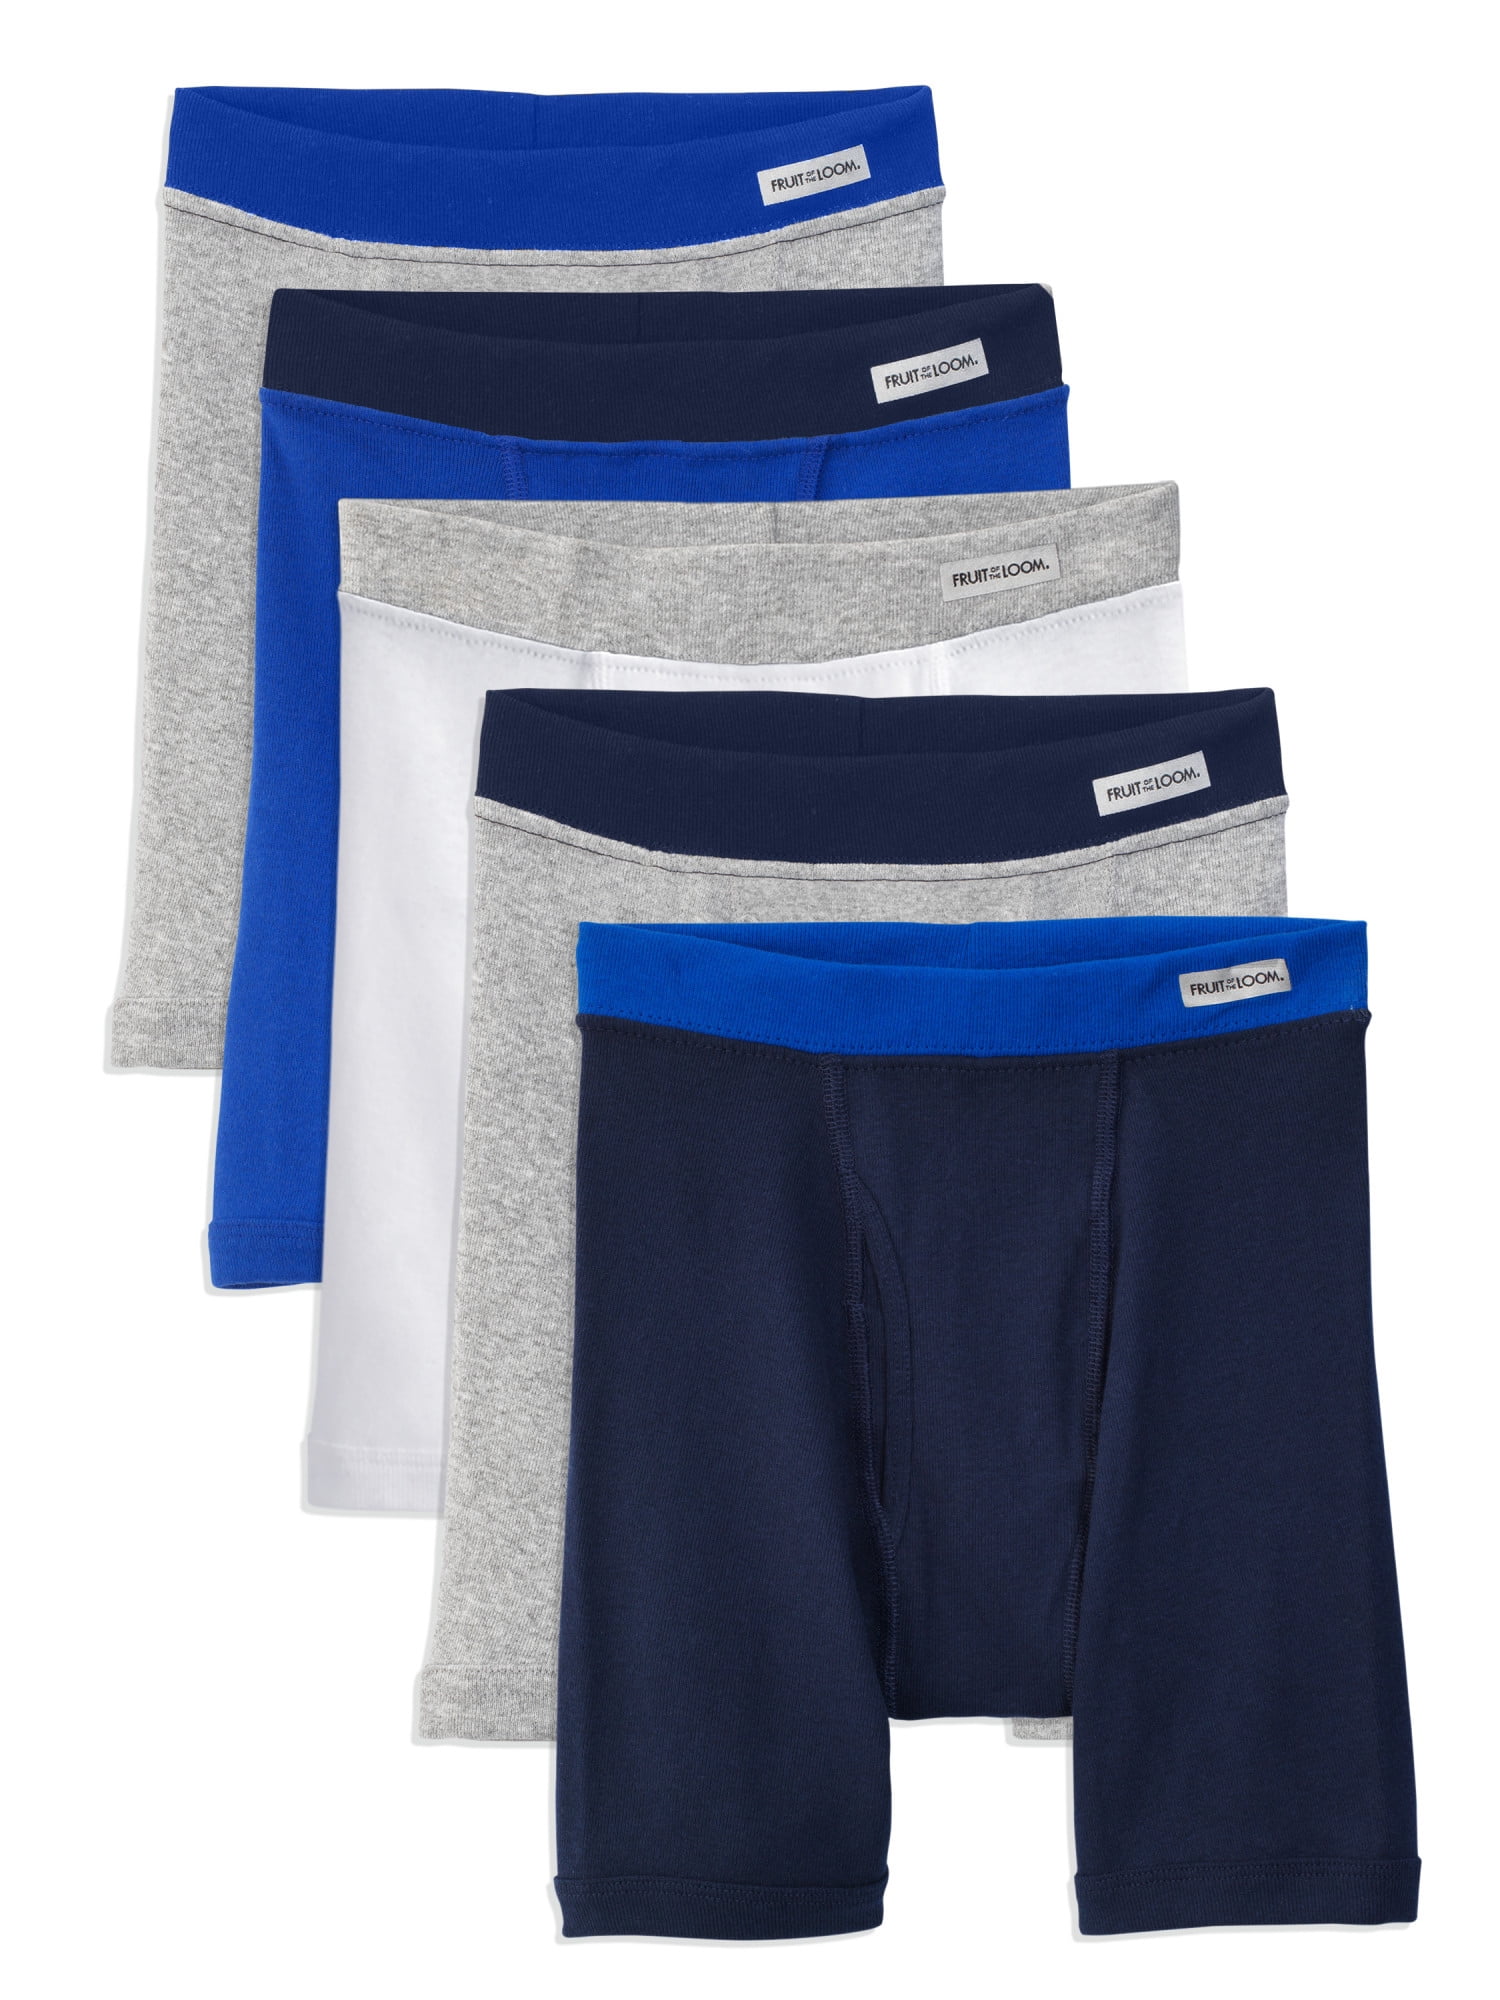 Fruit of the Loom Little Boys' Covered Waistband Knit Boxer Underwear Pack of 3 